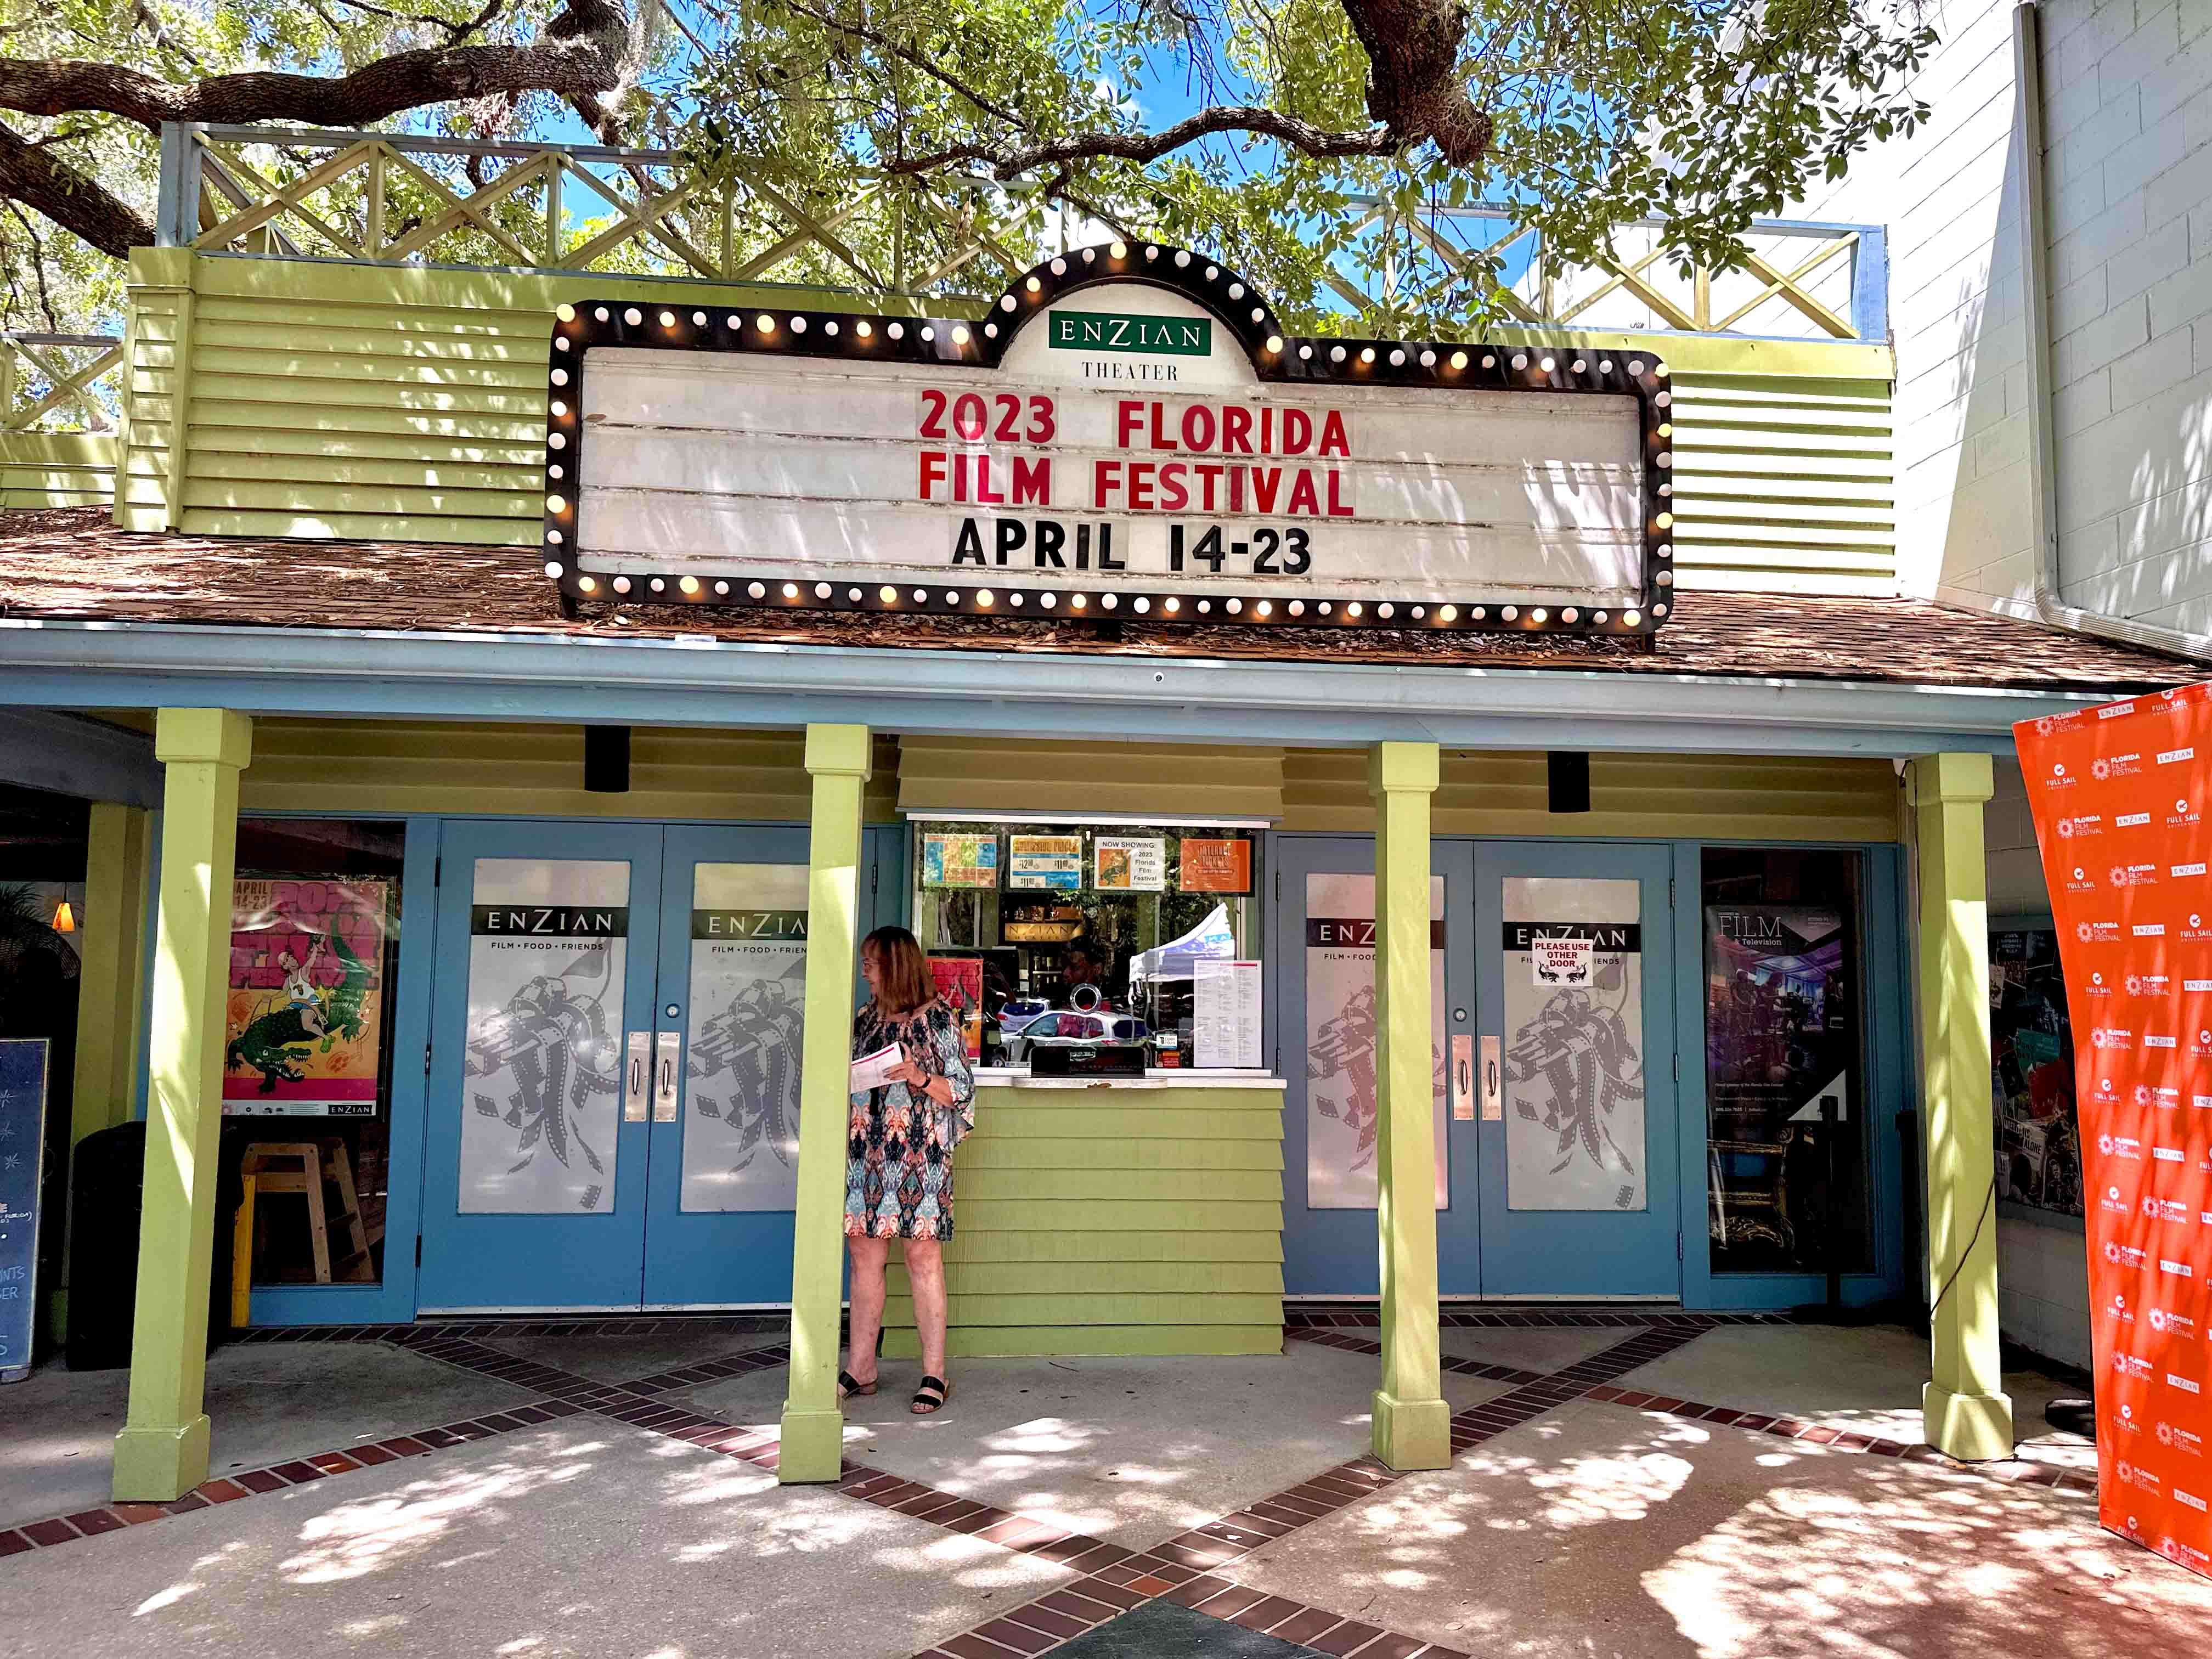 Exterior of the historic Enzian Theater in Maitland, FL